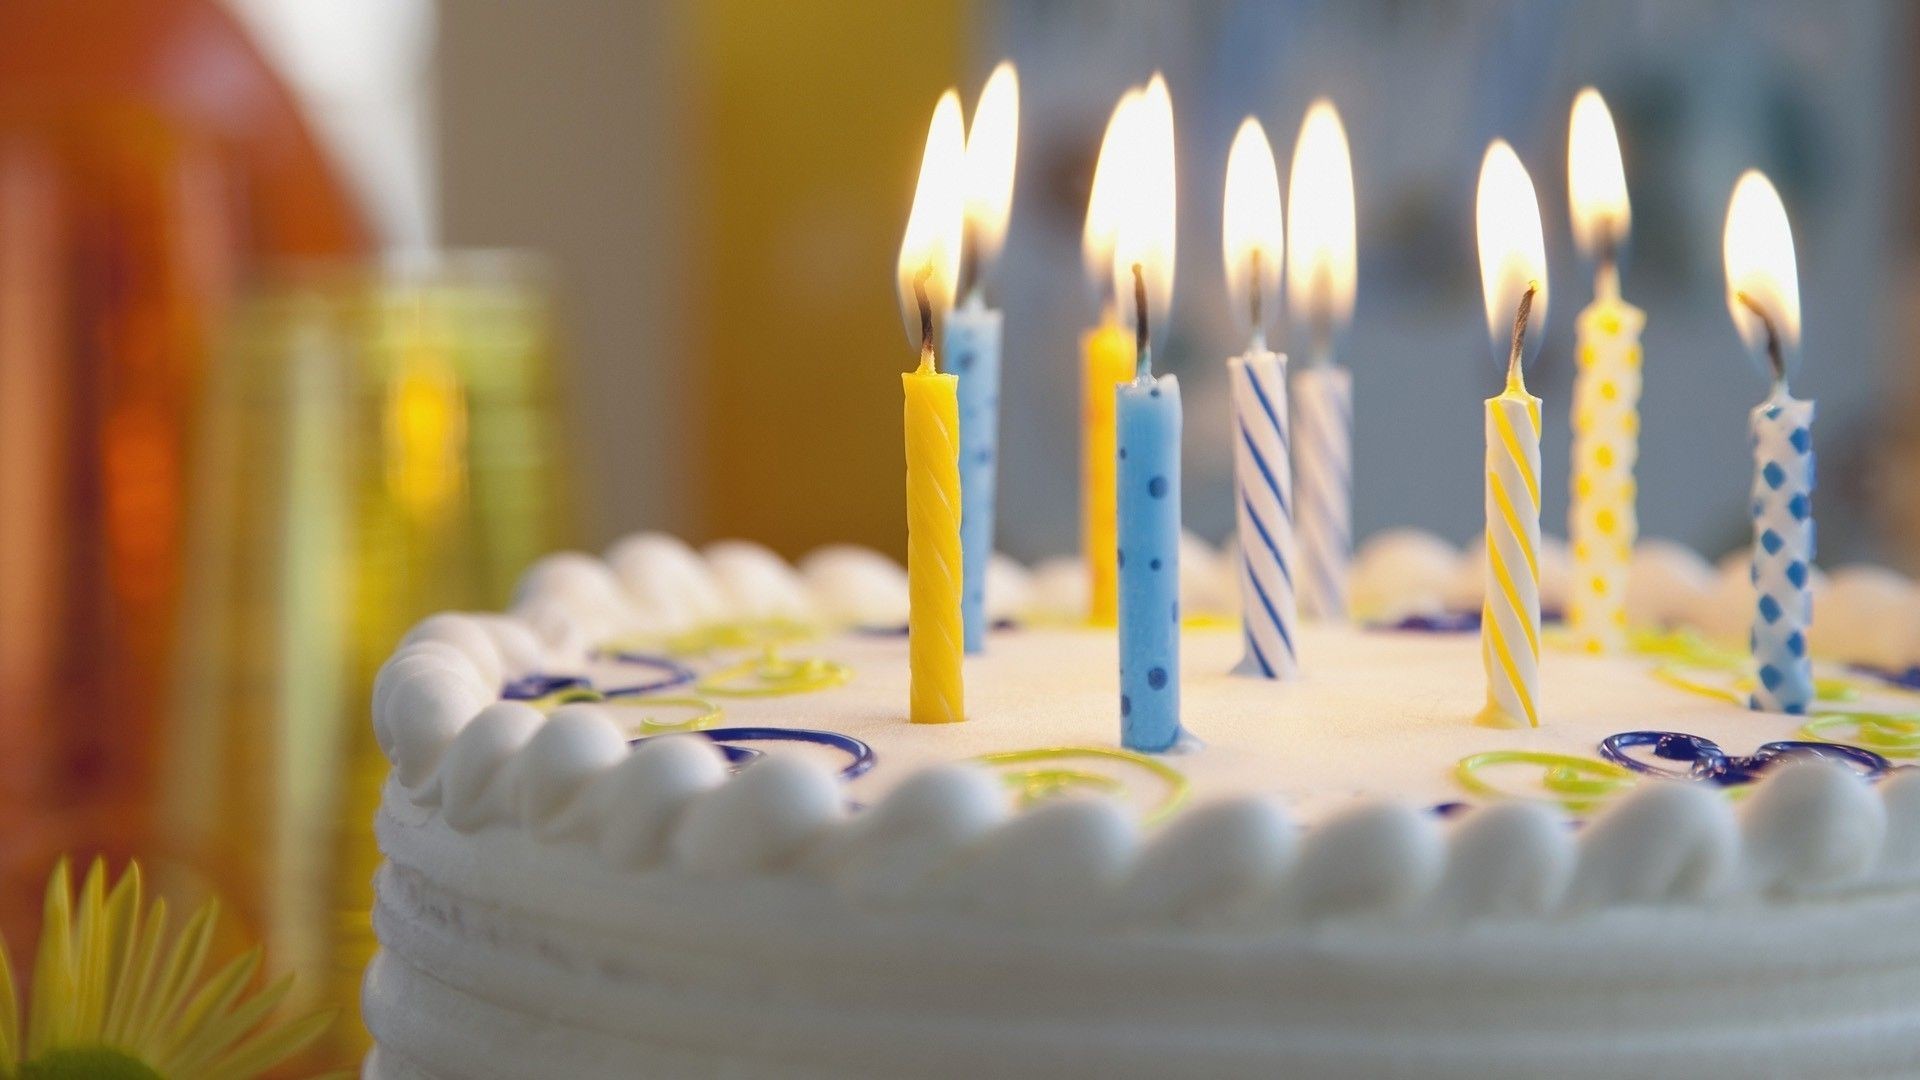 1920x1080 Birthday Cakes Wallpapers Desktop Hd Images 3 HD Wallpapers